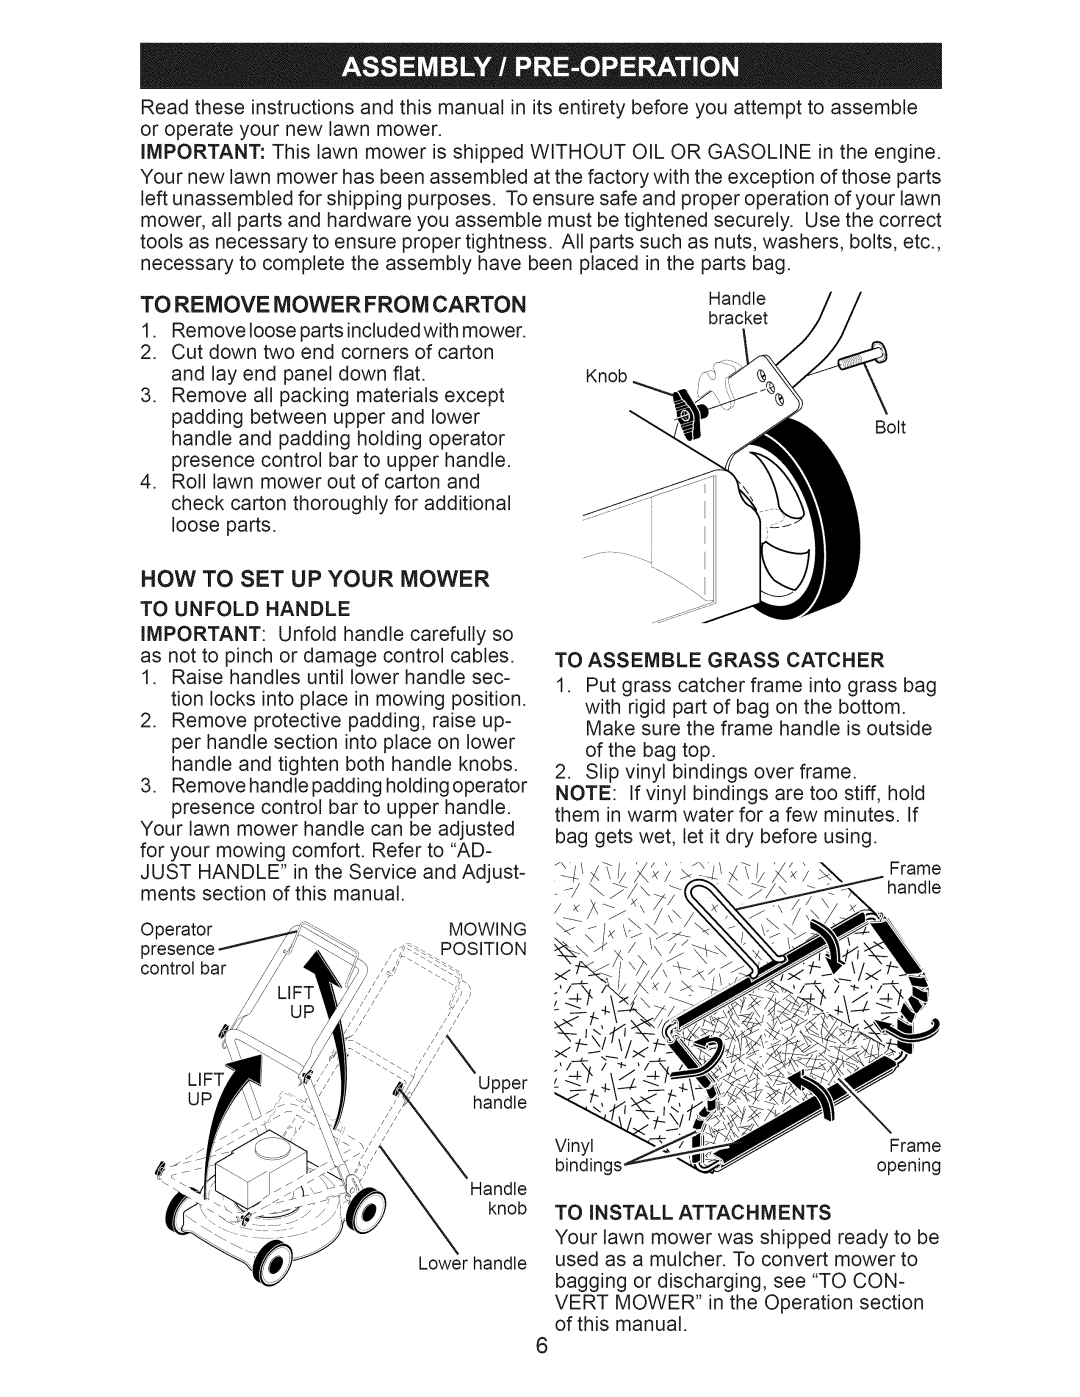 Craftsman 917.376404 owner manual To Remove Mower From Carton, Now To Set Up Your Mower 